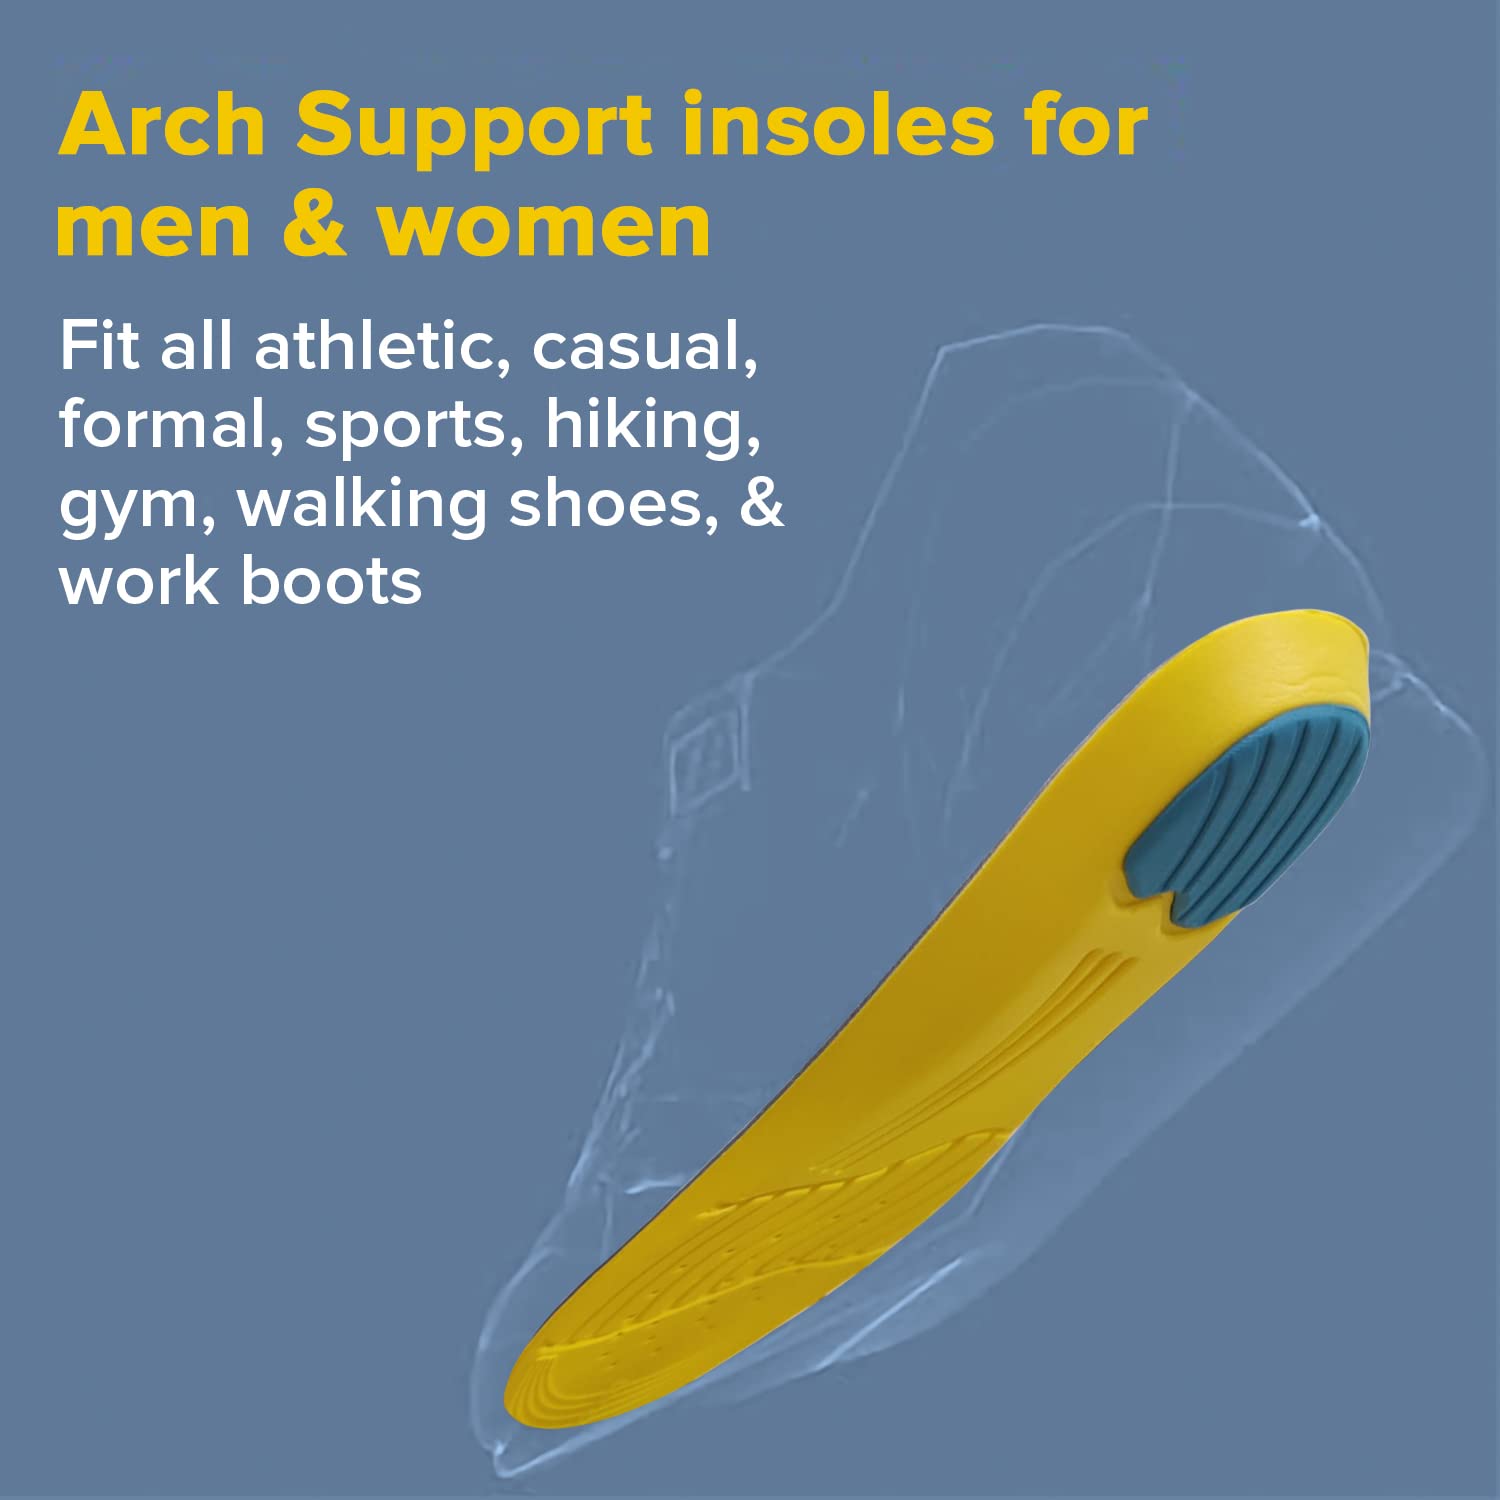 Dr Foot Gel Insoles Pair | For Walking, Running, Sports Shoes | All Day Comfort Shoe Inserts With Dual Gel Technology | Ideal Full-Length Sole For Every Shoe For Unisex- 1 Pair (Size - S) (Pack of 2)